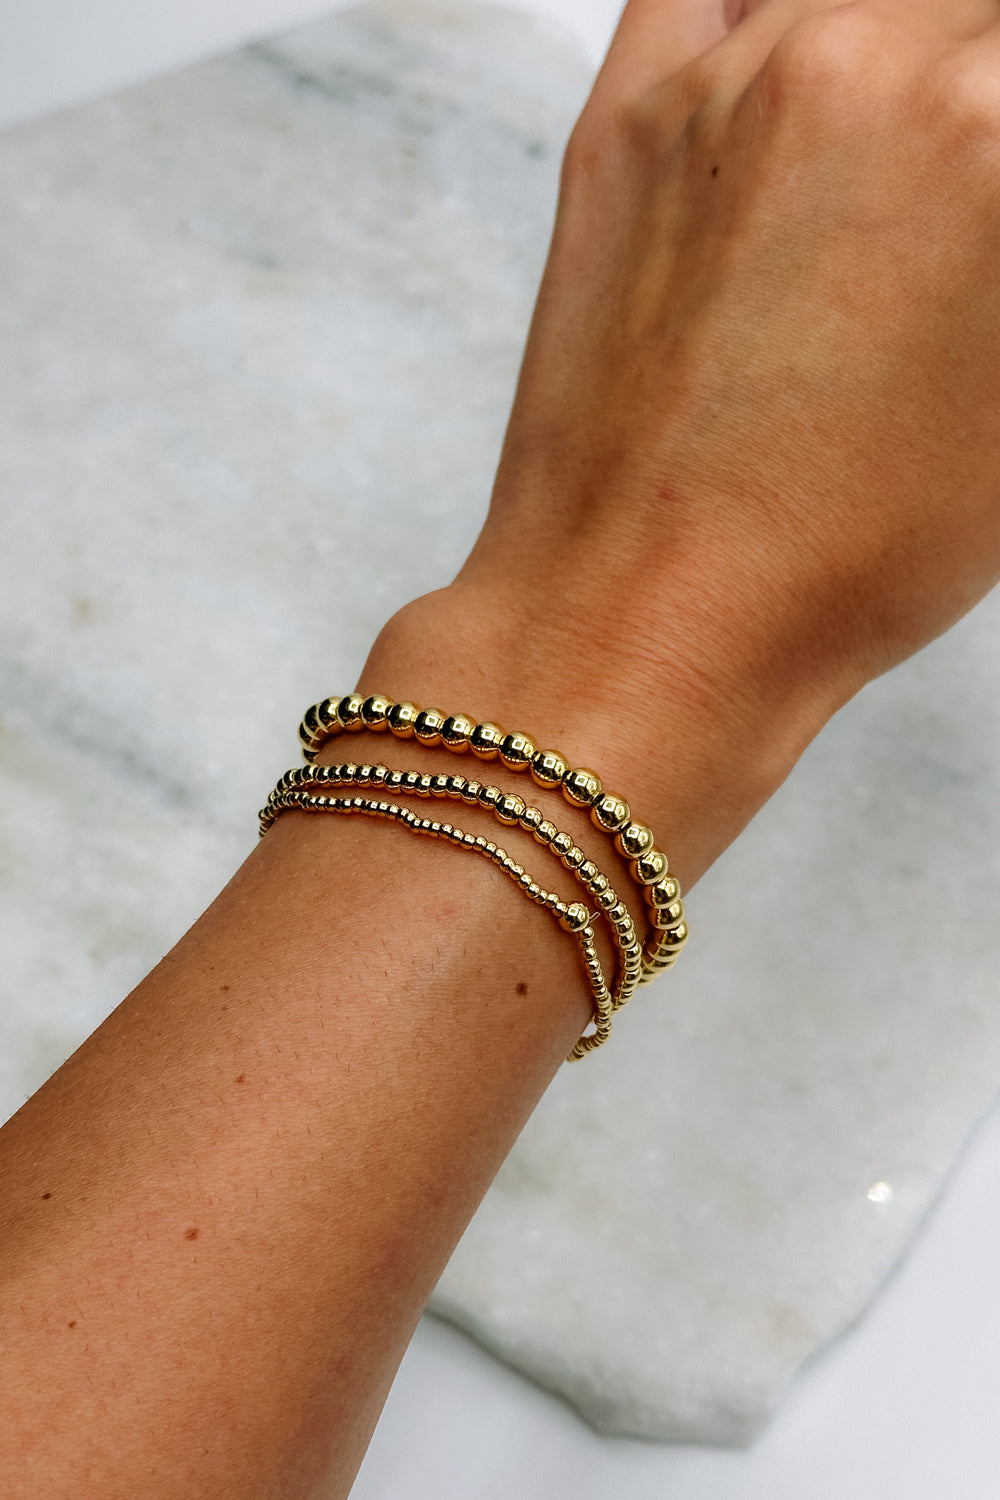 Image shows Jane Gold 2mm Beaded Water Resistant Bracelet on model's wrist with two other bracelets.